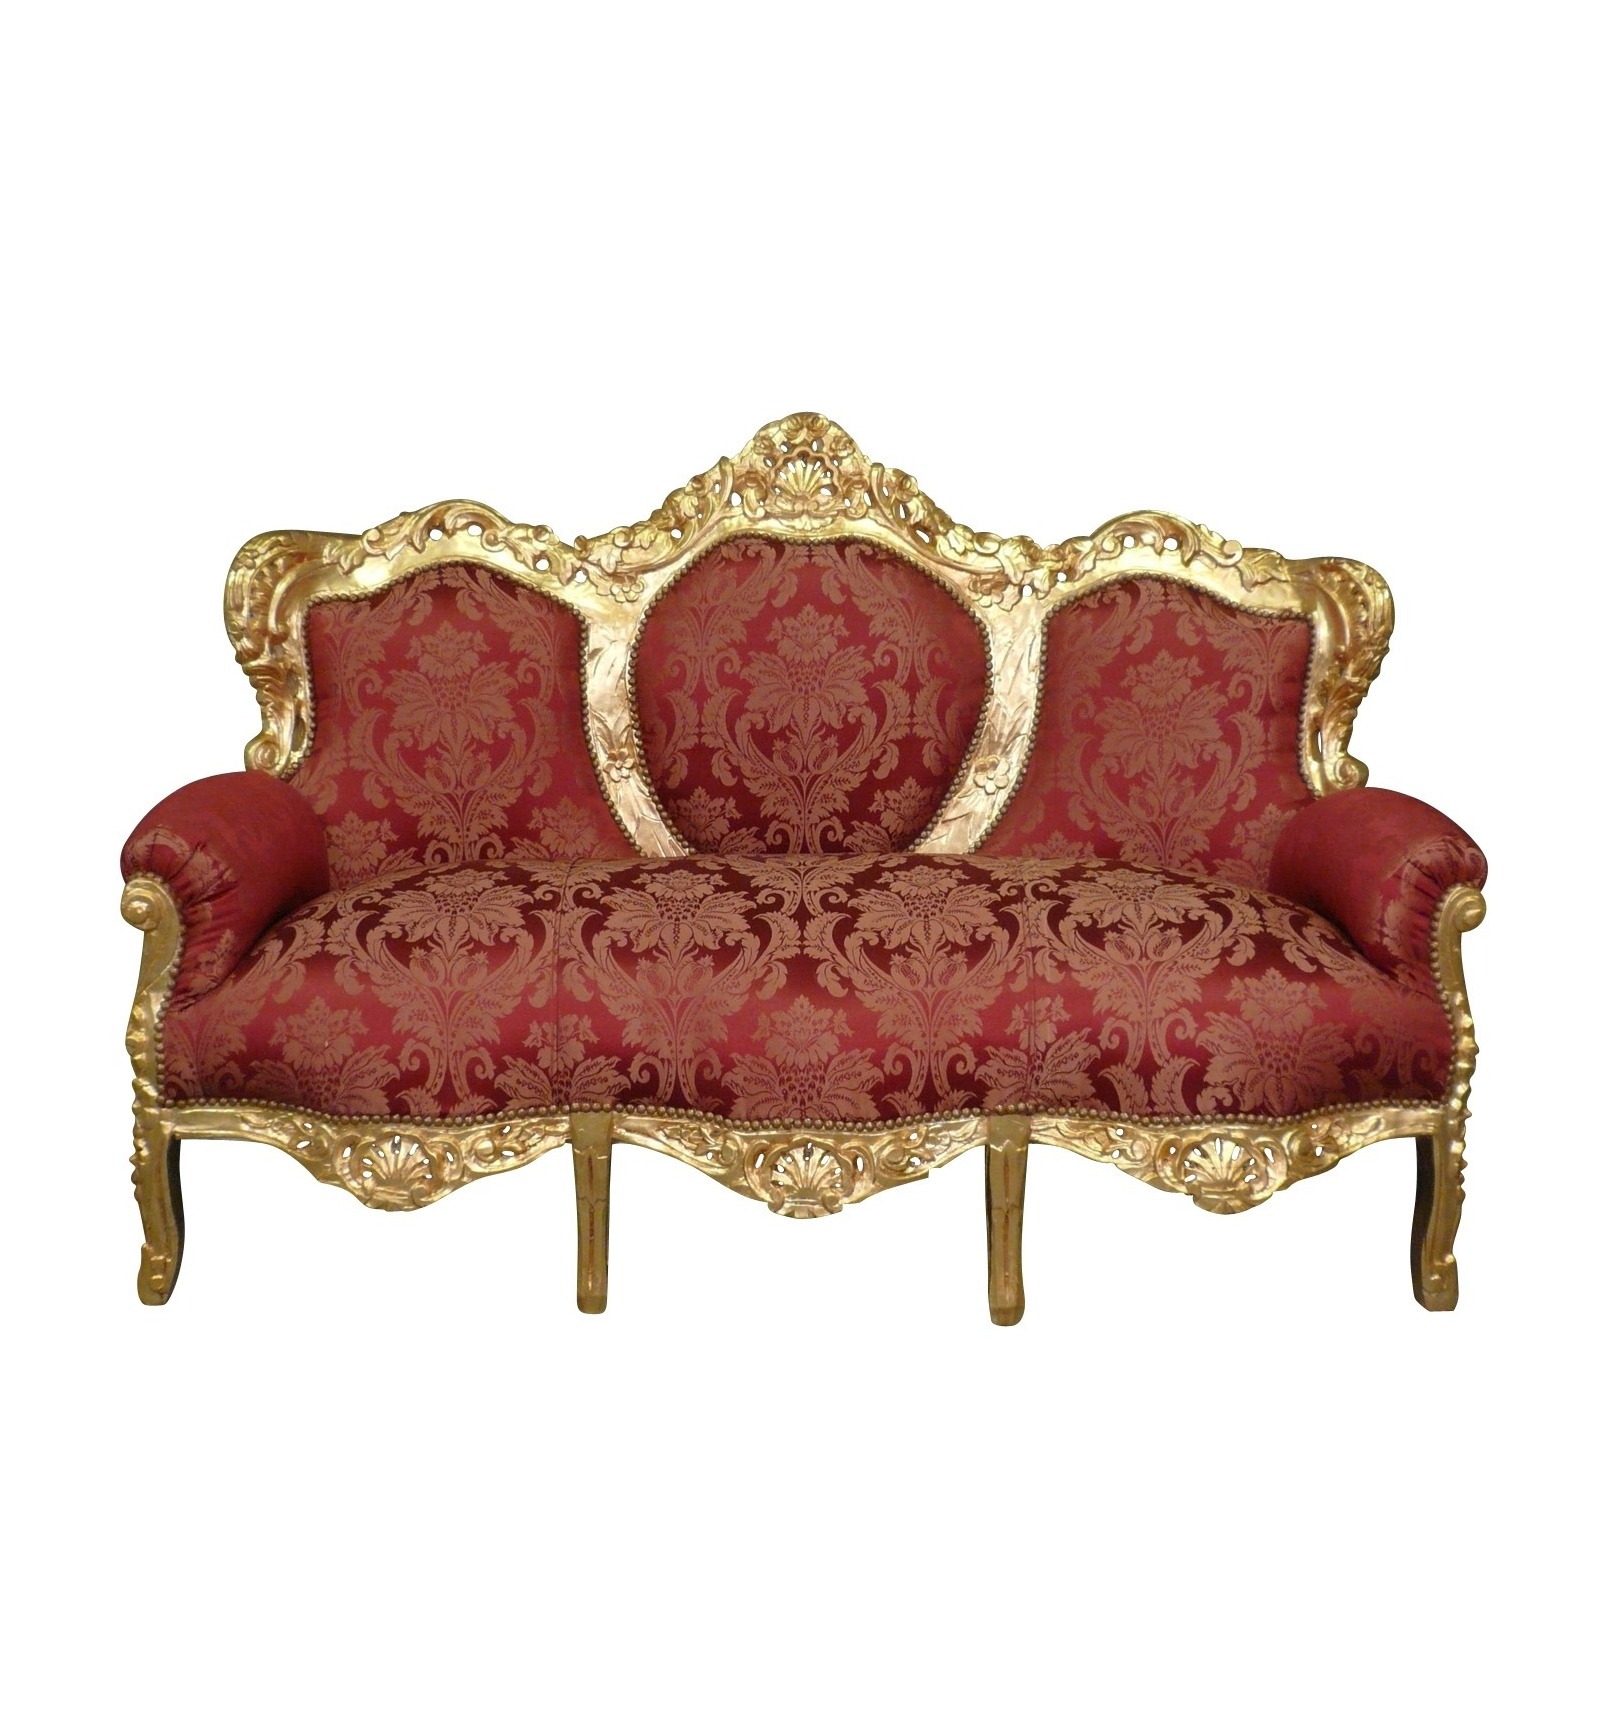 Baroque red and gold sofa - Baroque Furniture